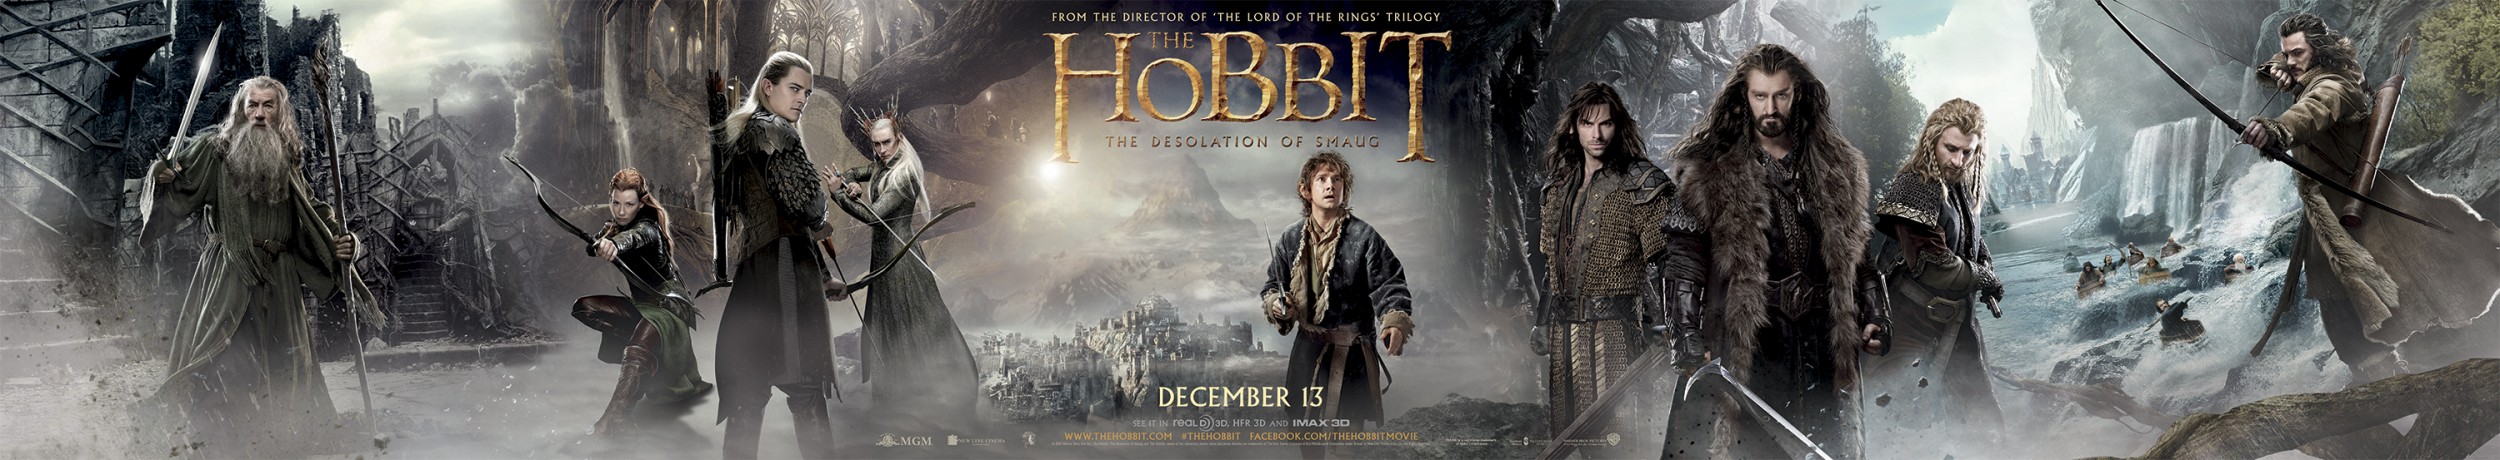 Extra Large Movie Poster Image for The Hobbit: The Desolation of Smaug (#7 of 33)